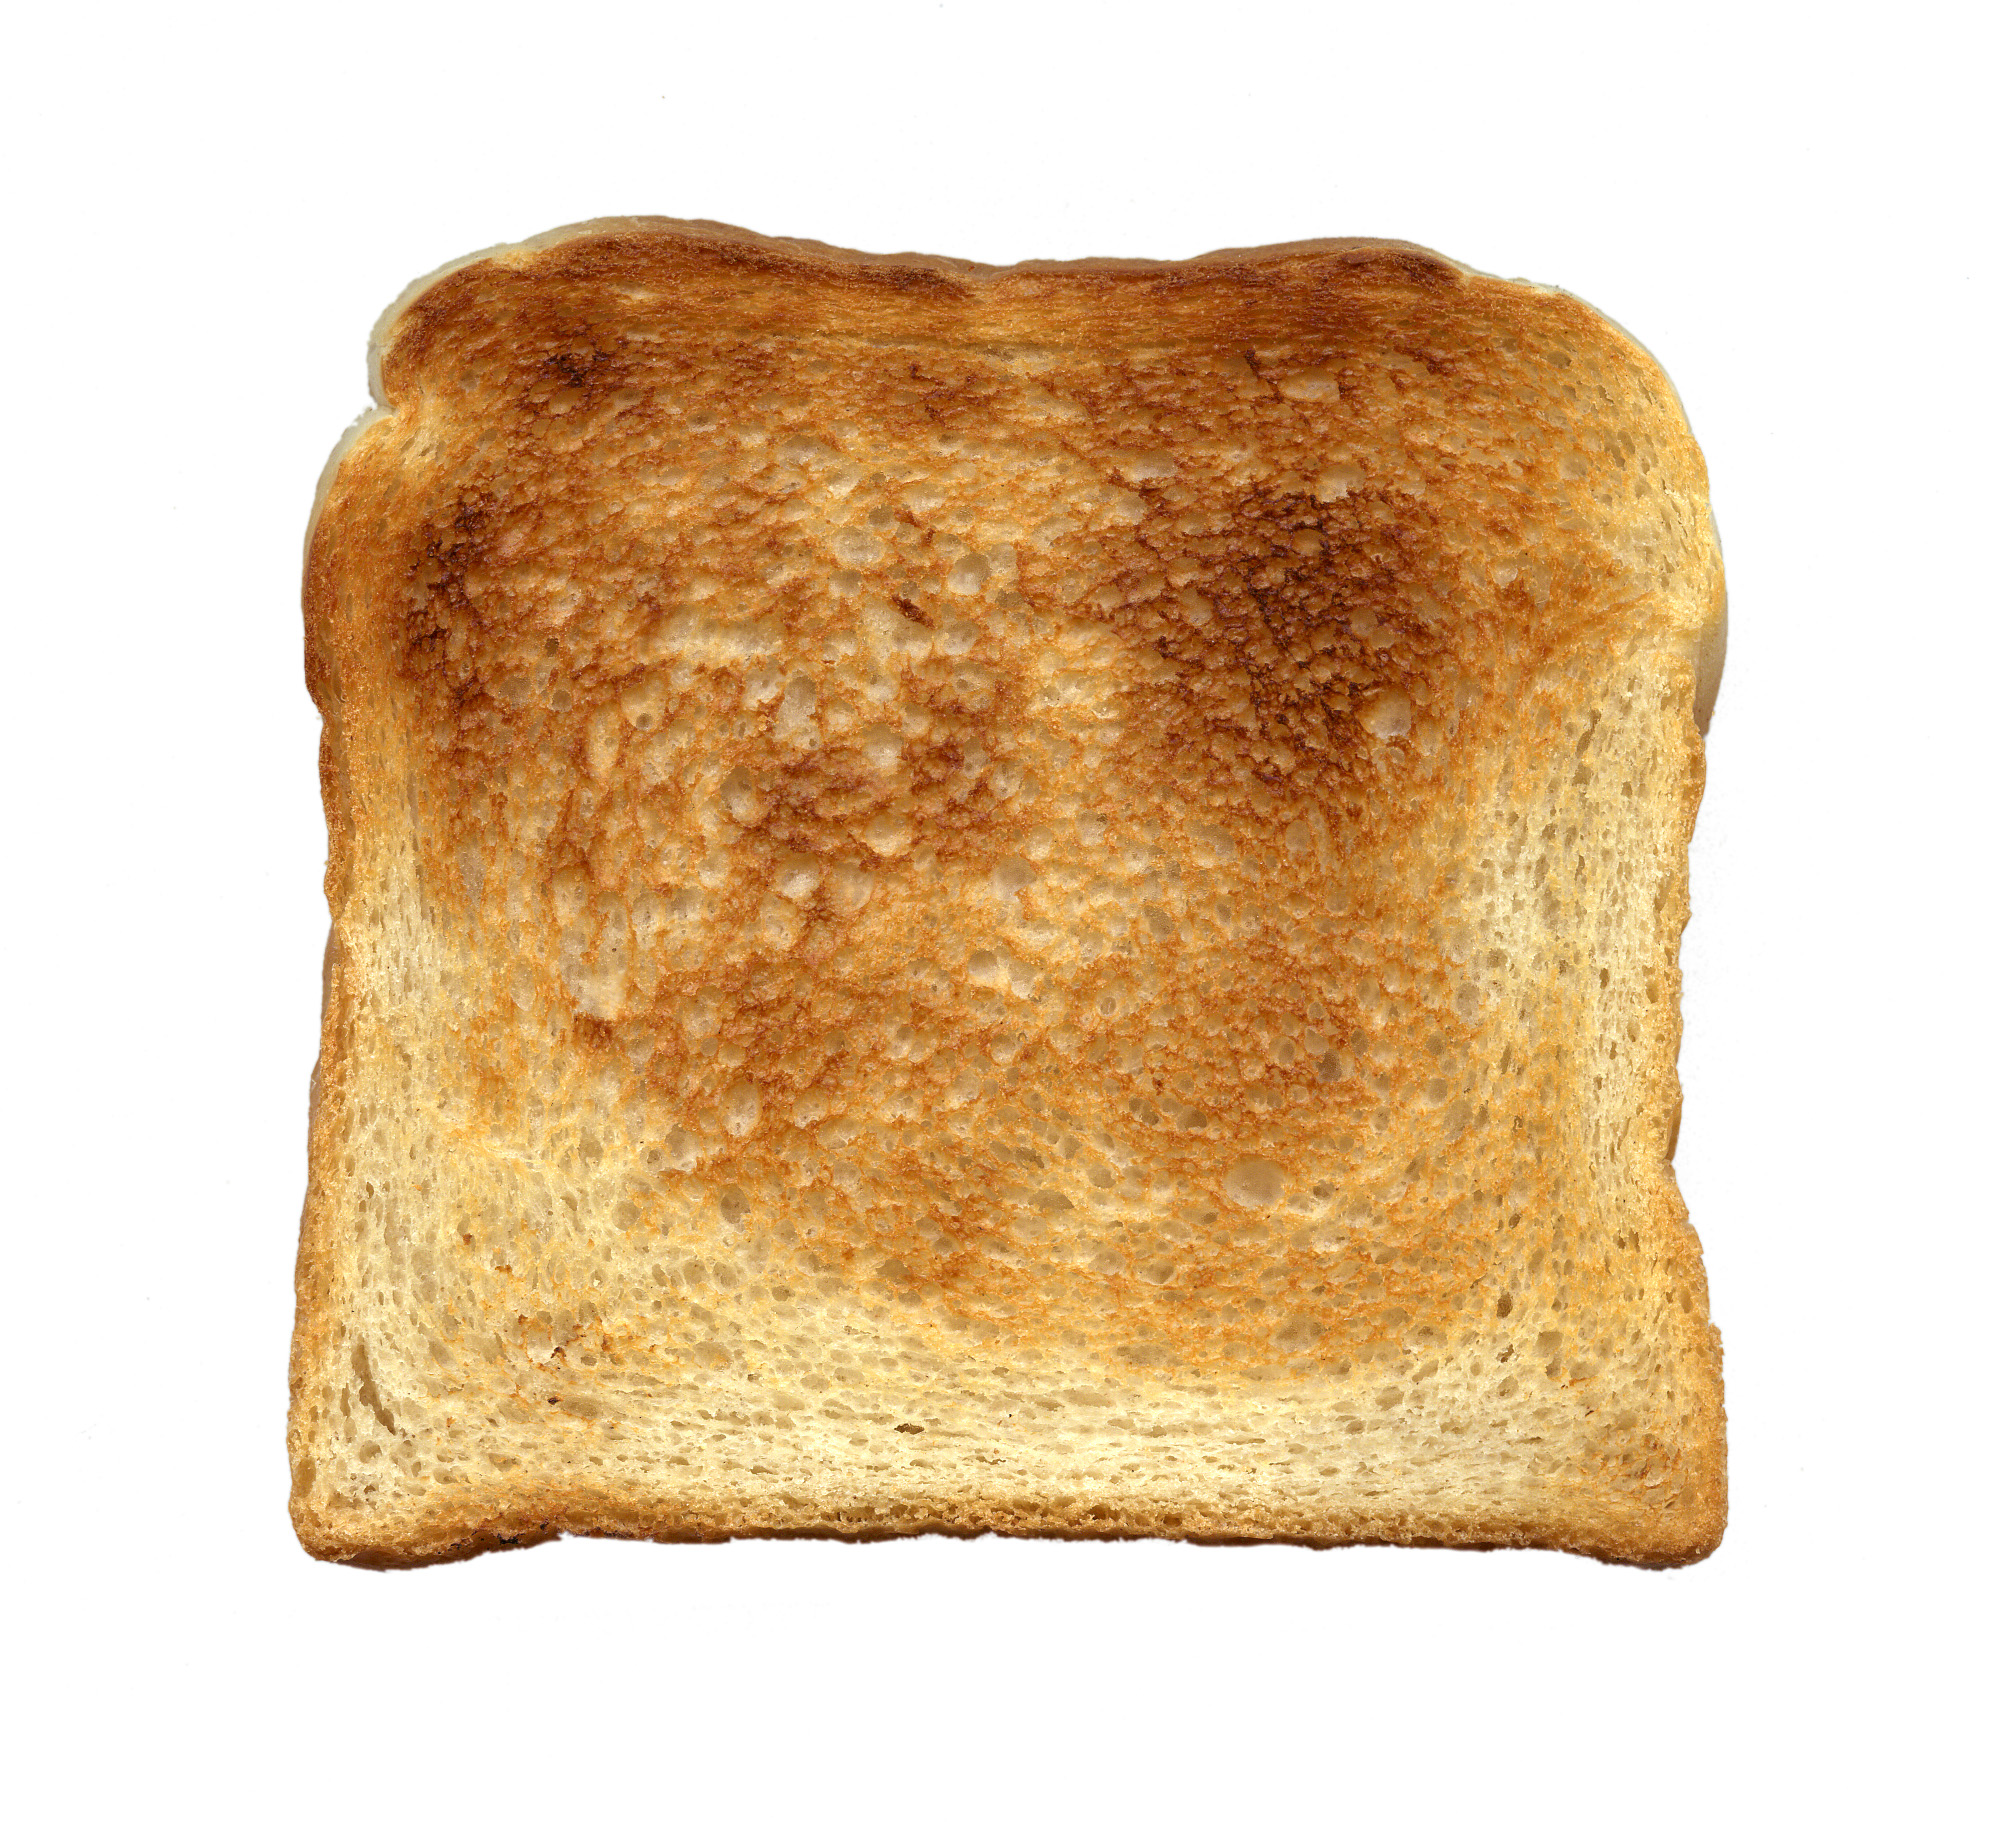 Toast | Free Images at Clker.com - vector clip art online, royalty free